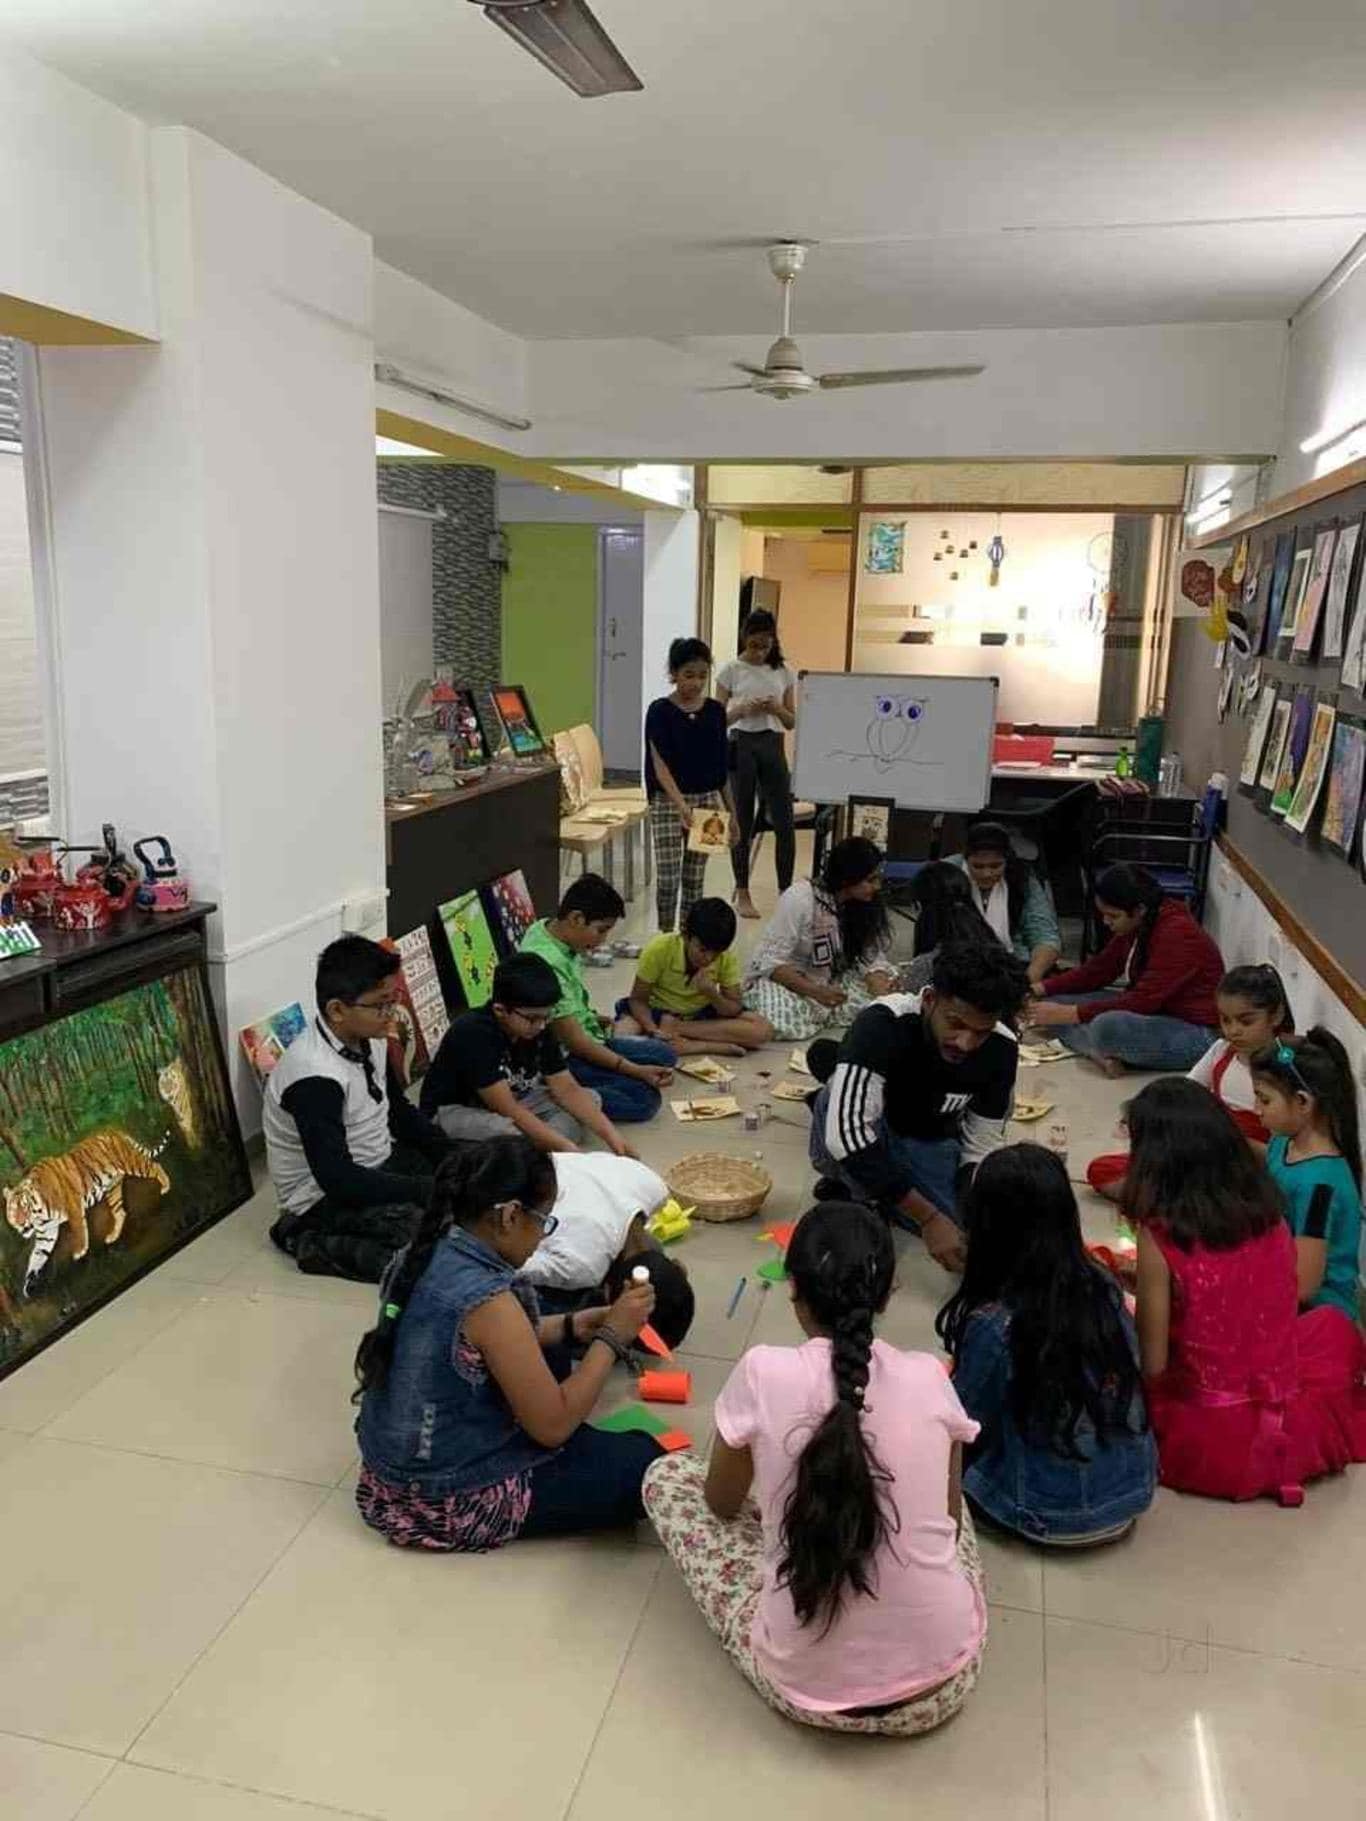 Brain Box Team 360 Bhubaneswar - Know your child better with DMIT test, the  unique institute to trained your child for better improvement of its brain  functionality and to guide him/her for